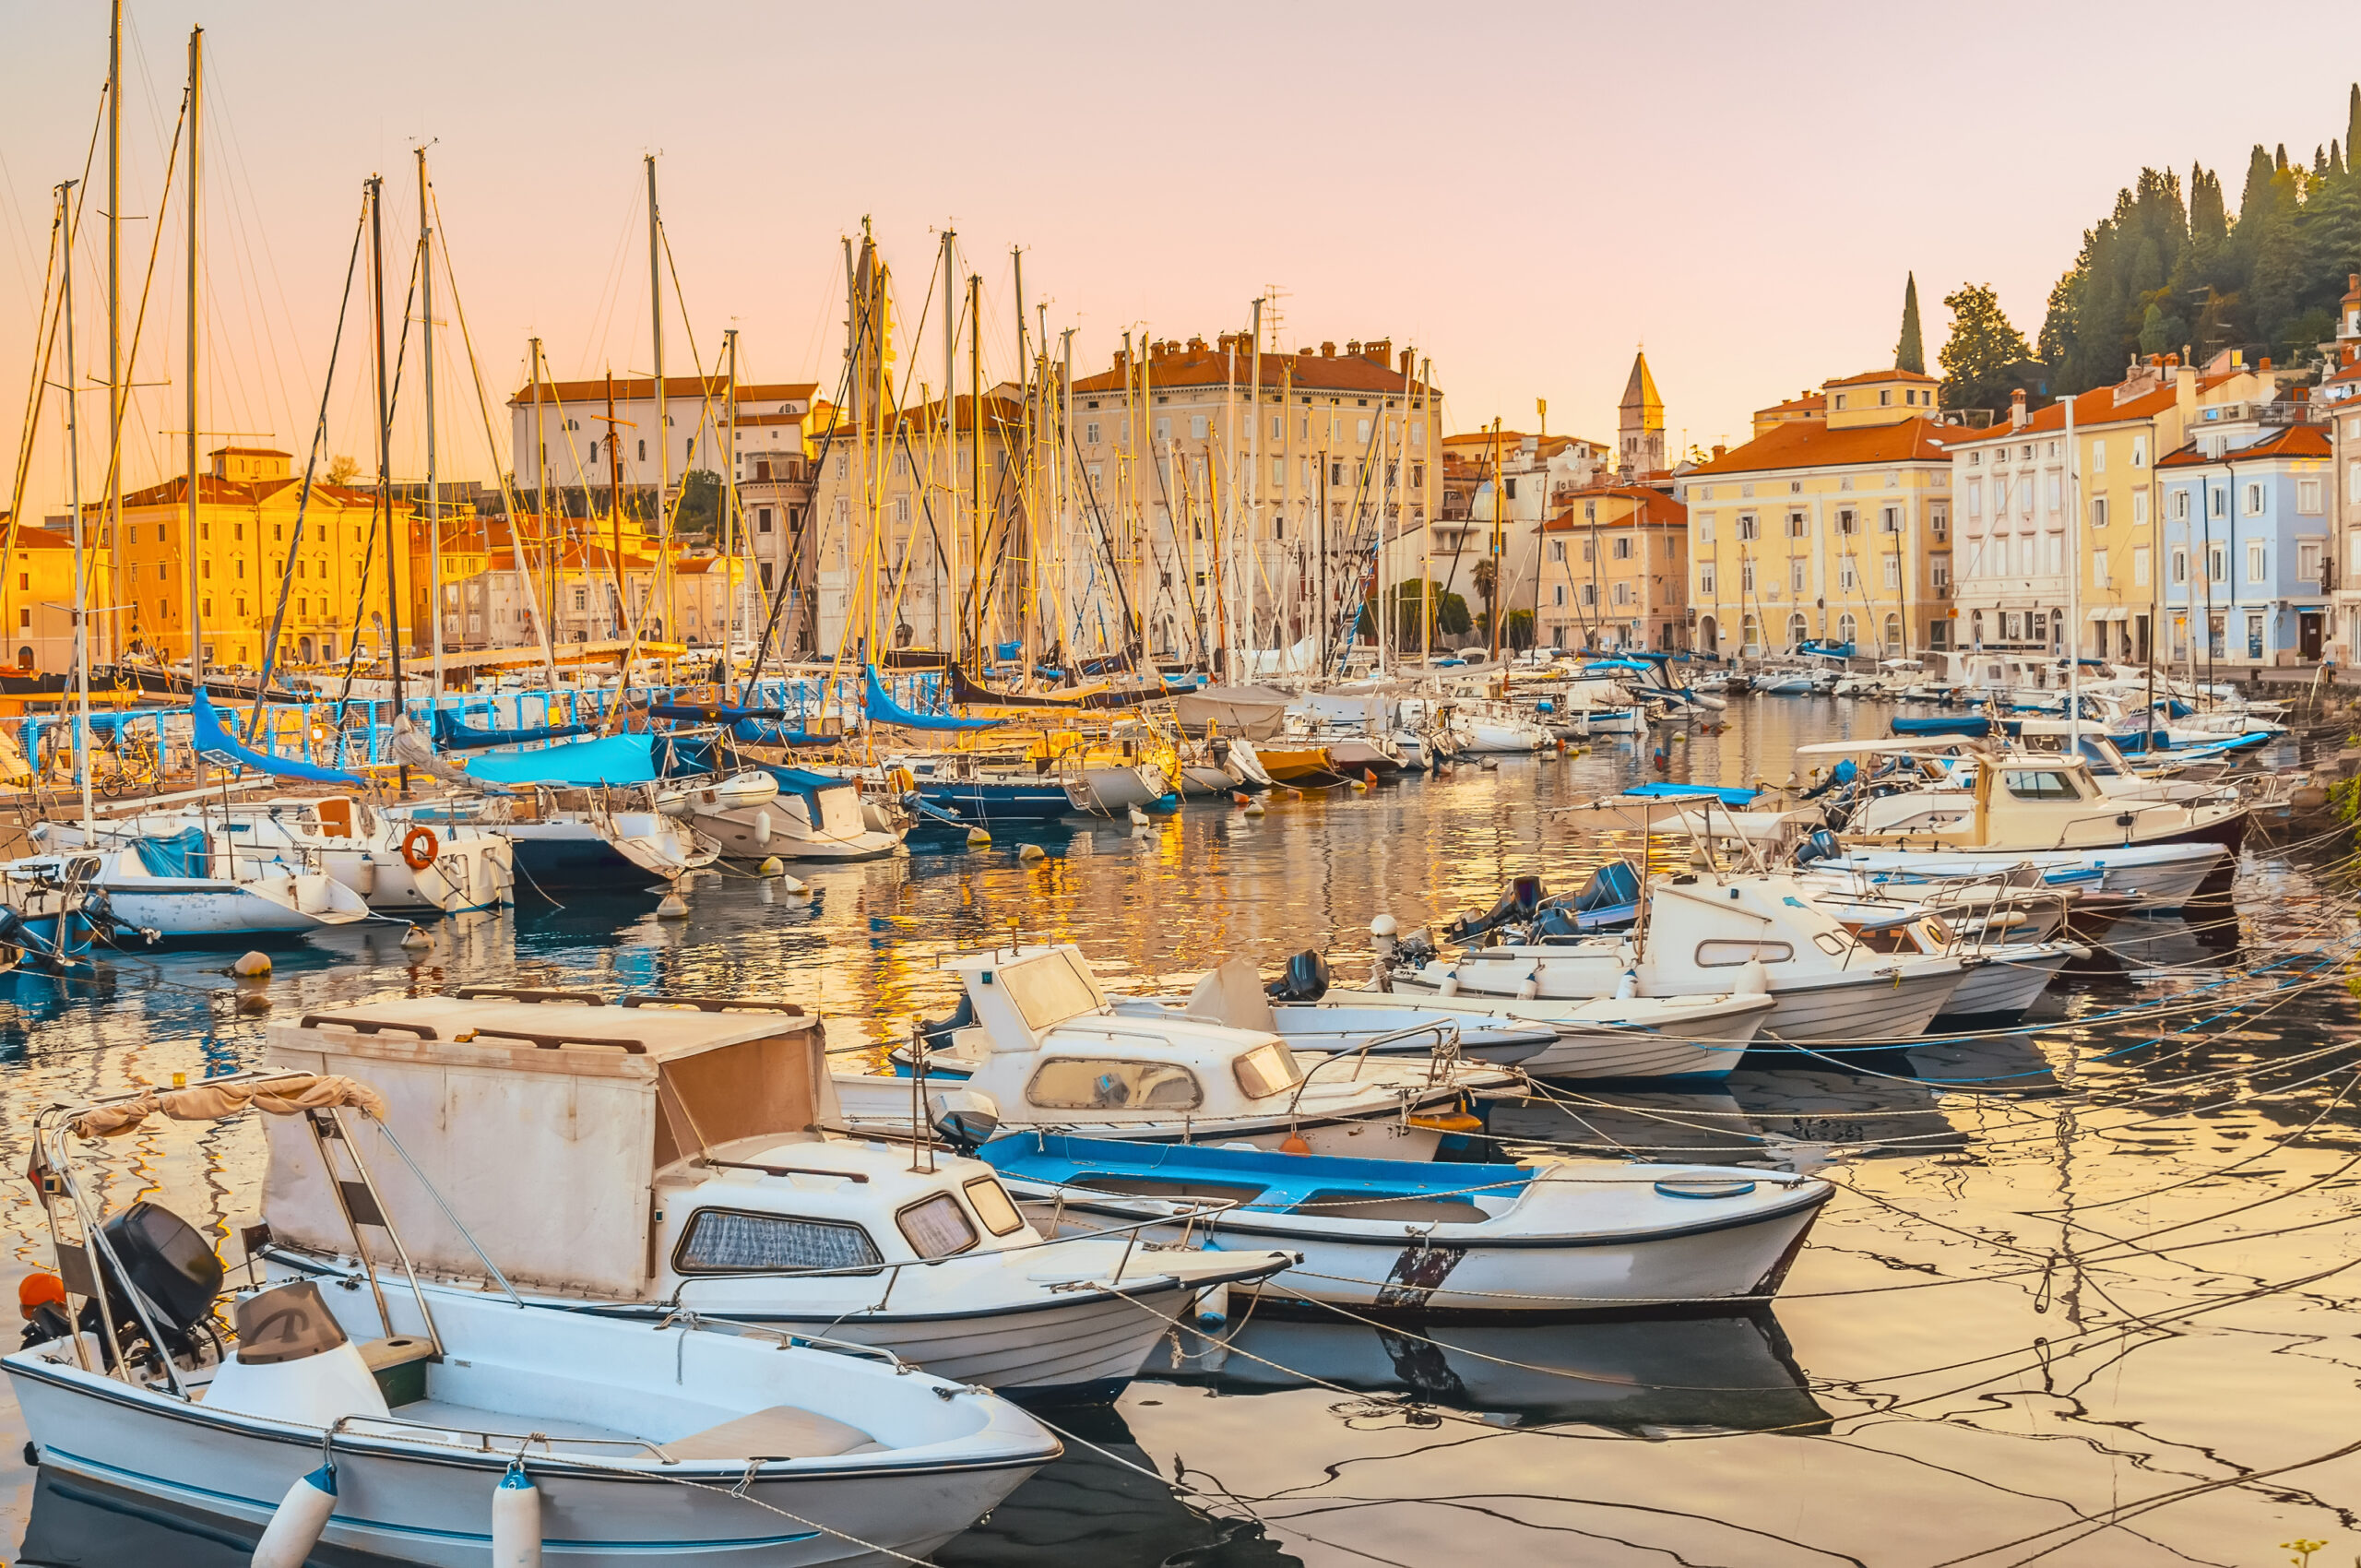 Mooring for fishing boats and yachts on the Mediterranean coast at dawn